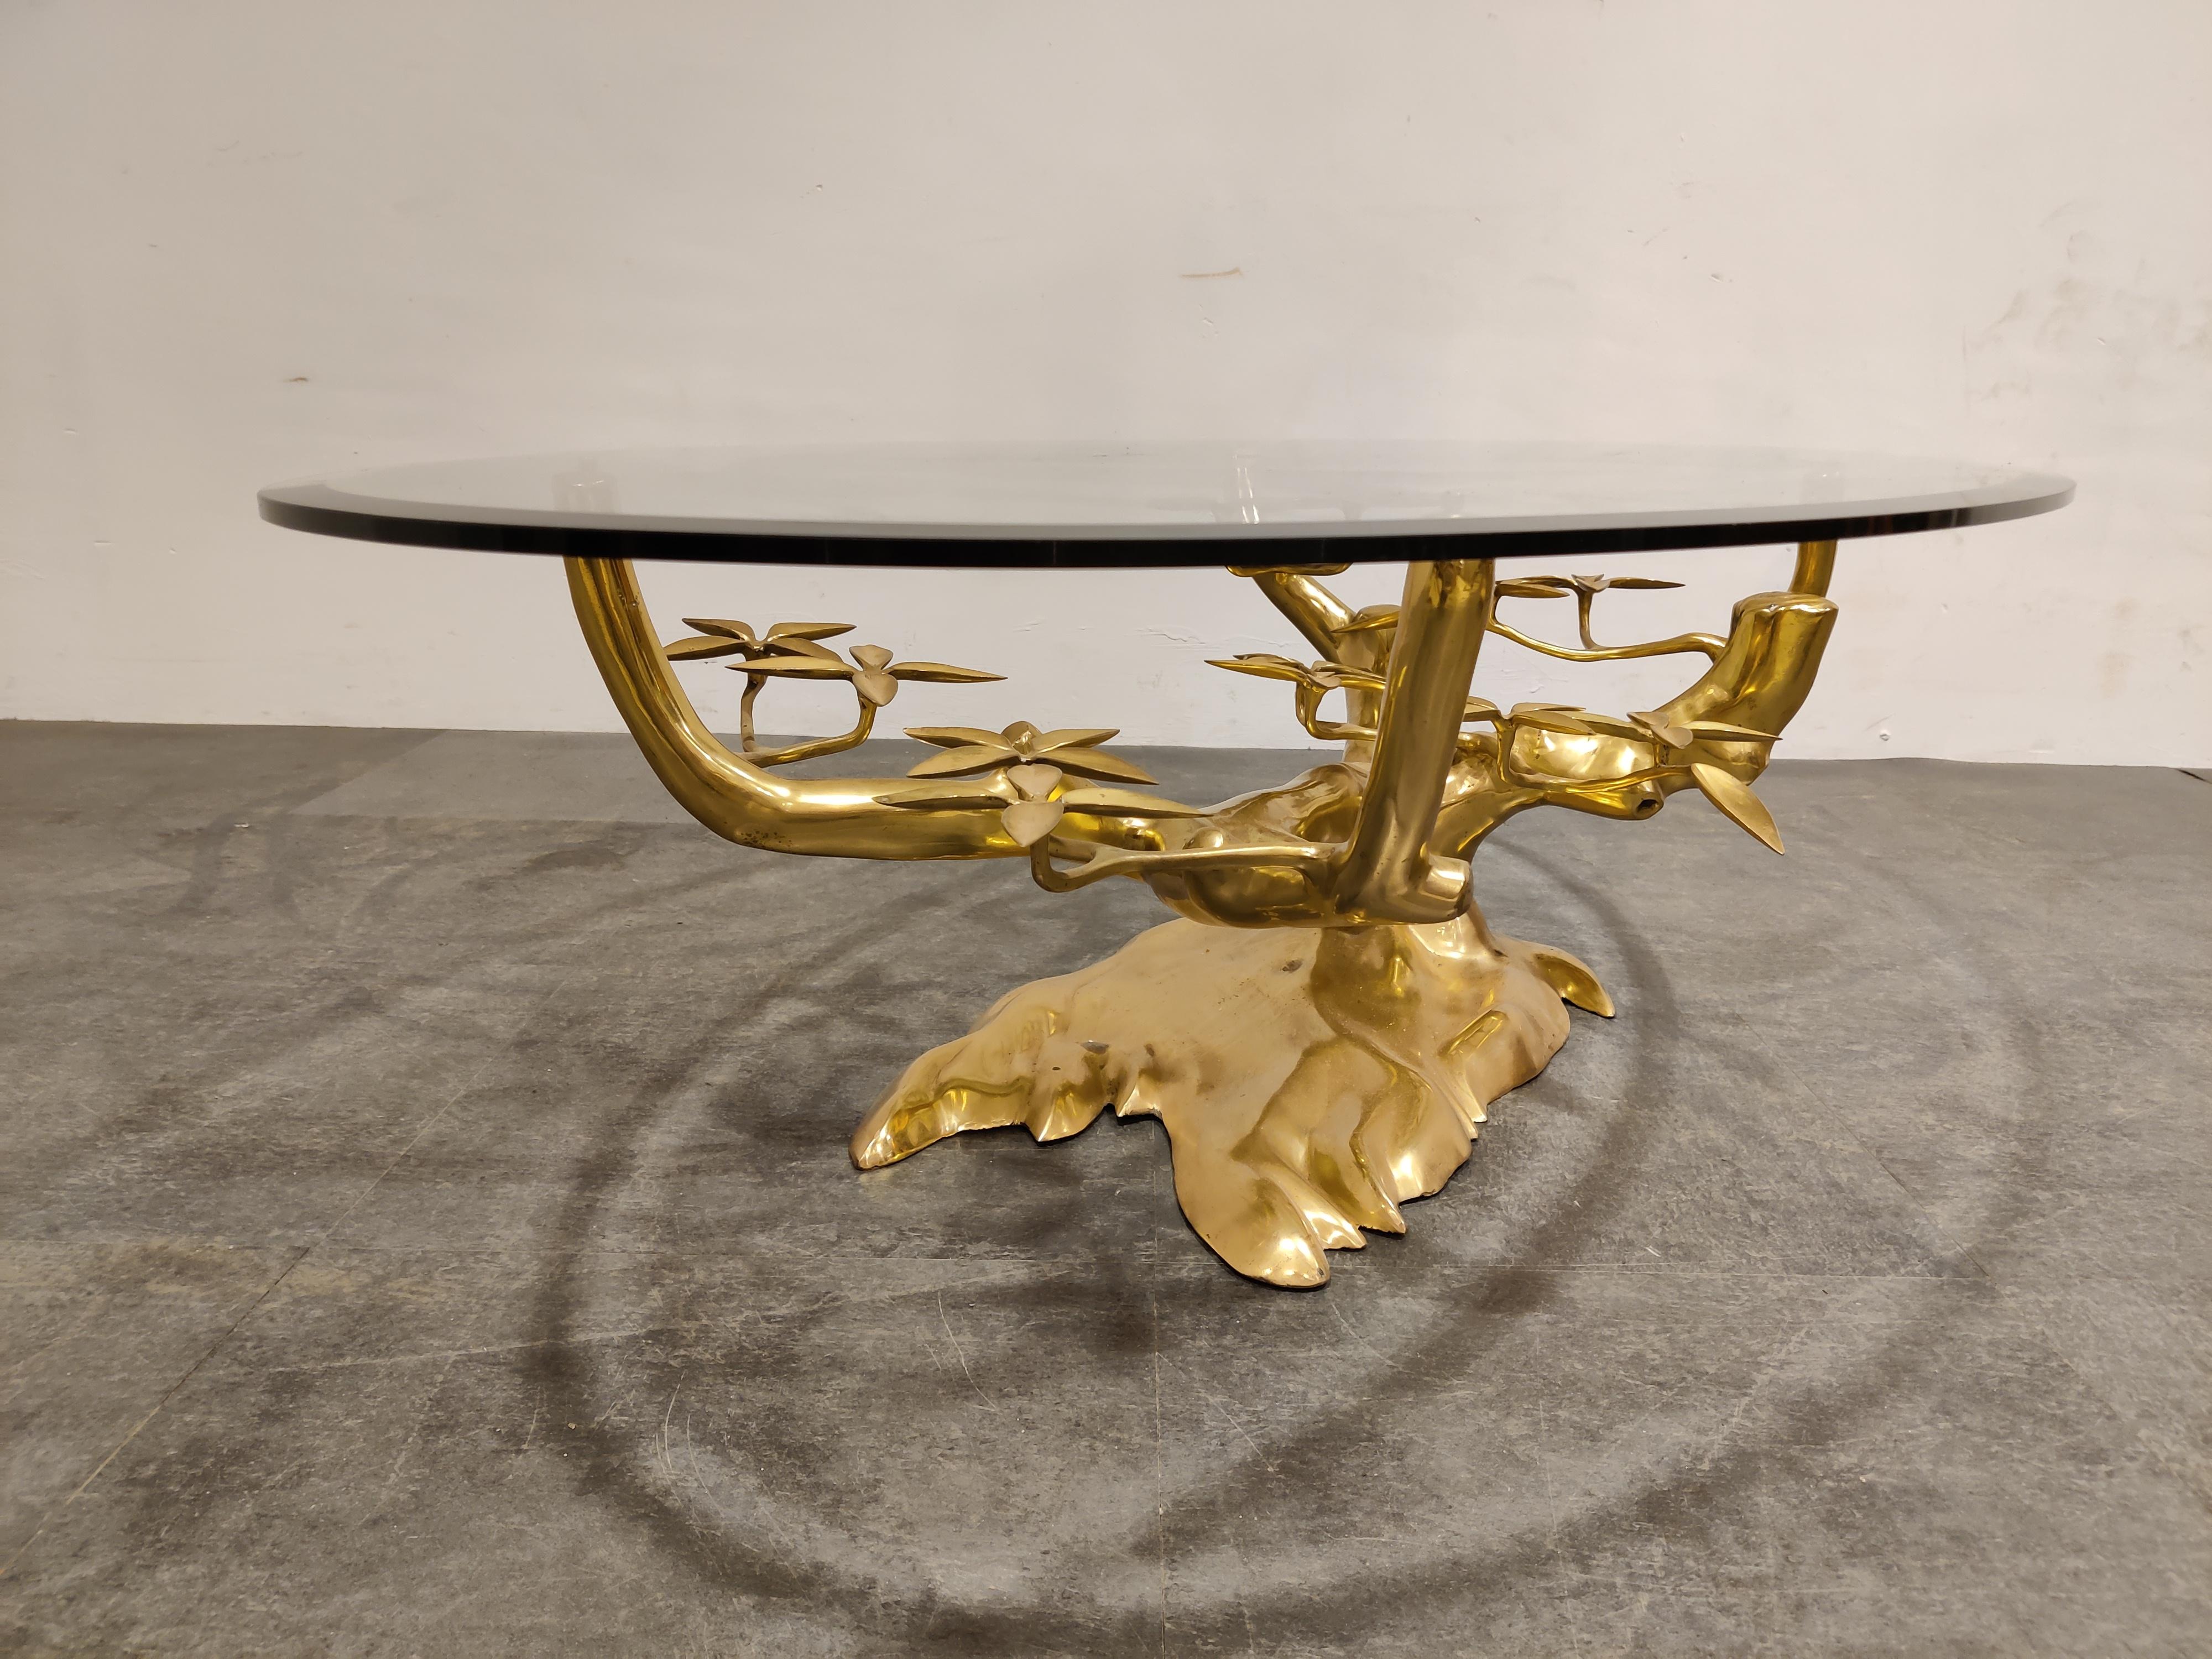 Brass bonsai coffee table by Willy Daro.

Beautifully manufactured sculpture, comes with a clear glass top.

Slight patina, no damages.

1970s - Belgium

Dimensions:
Height: 42cm/16.53